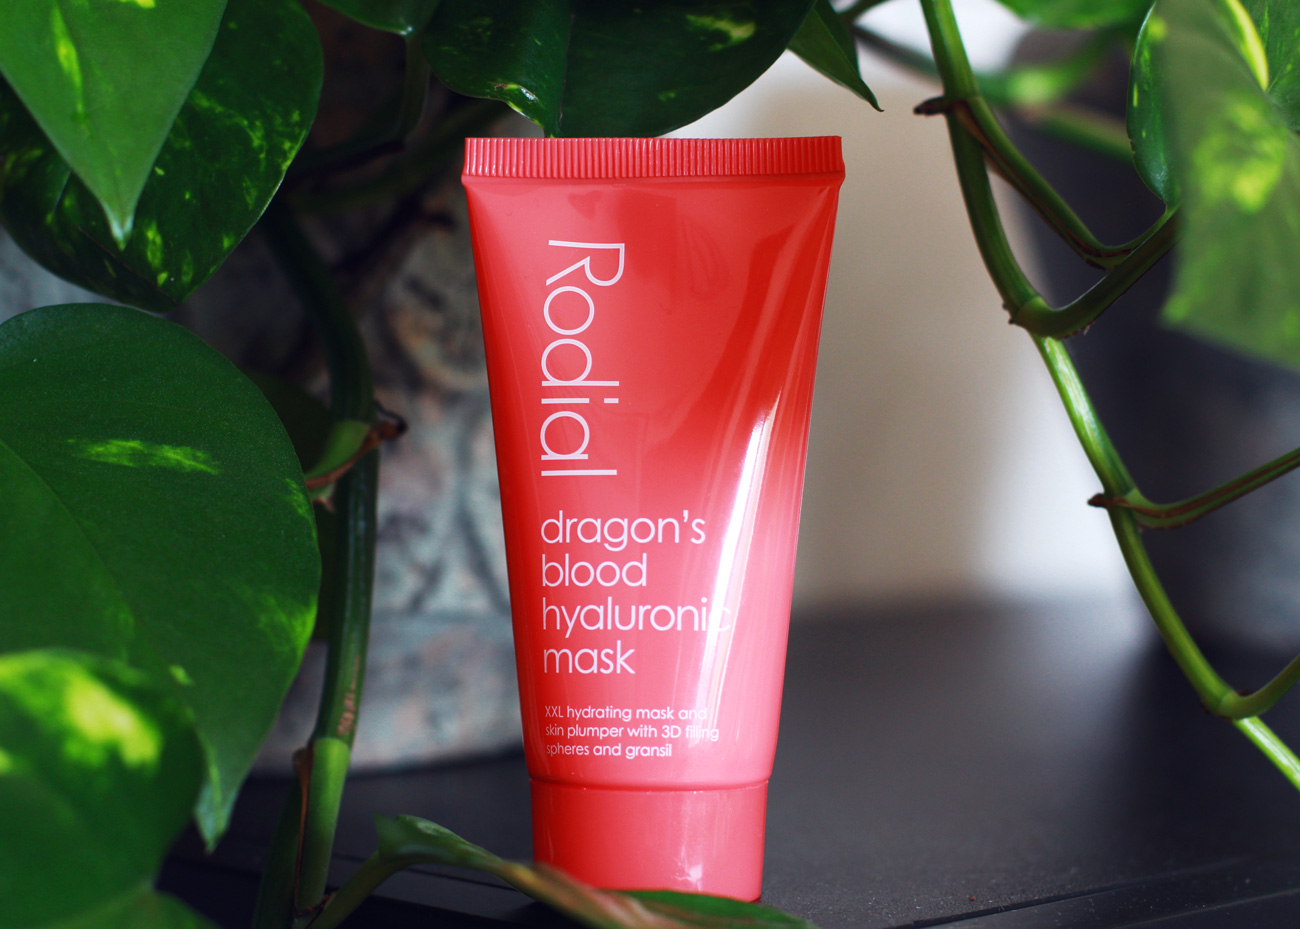 Rodial Dragon's blood hyaluronic mask